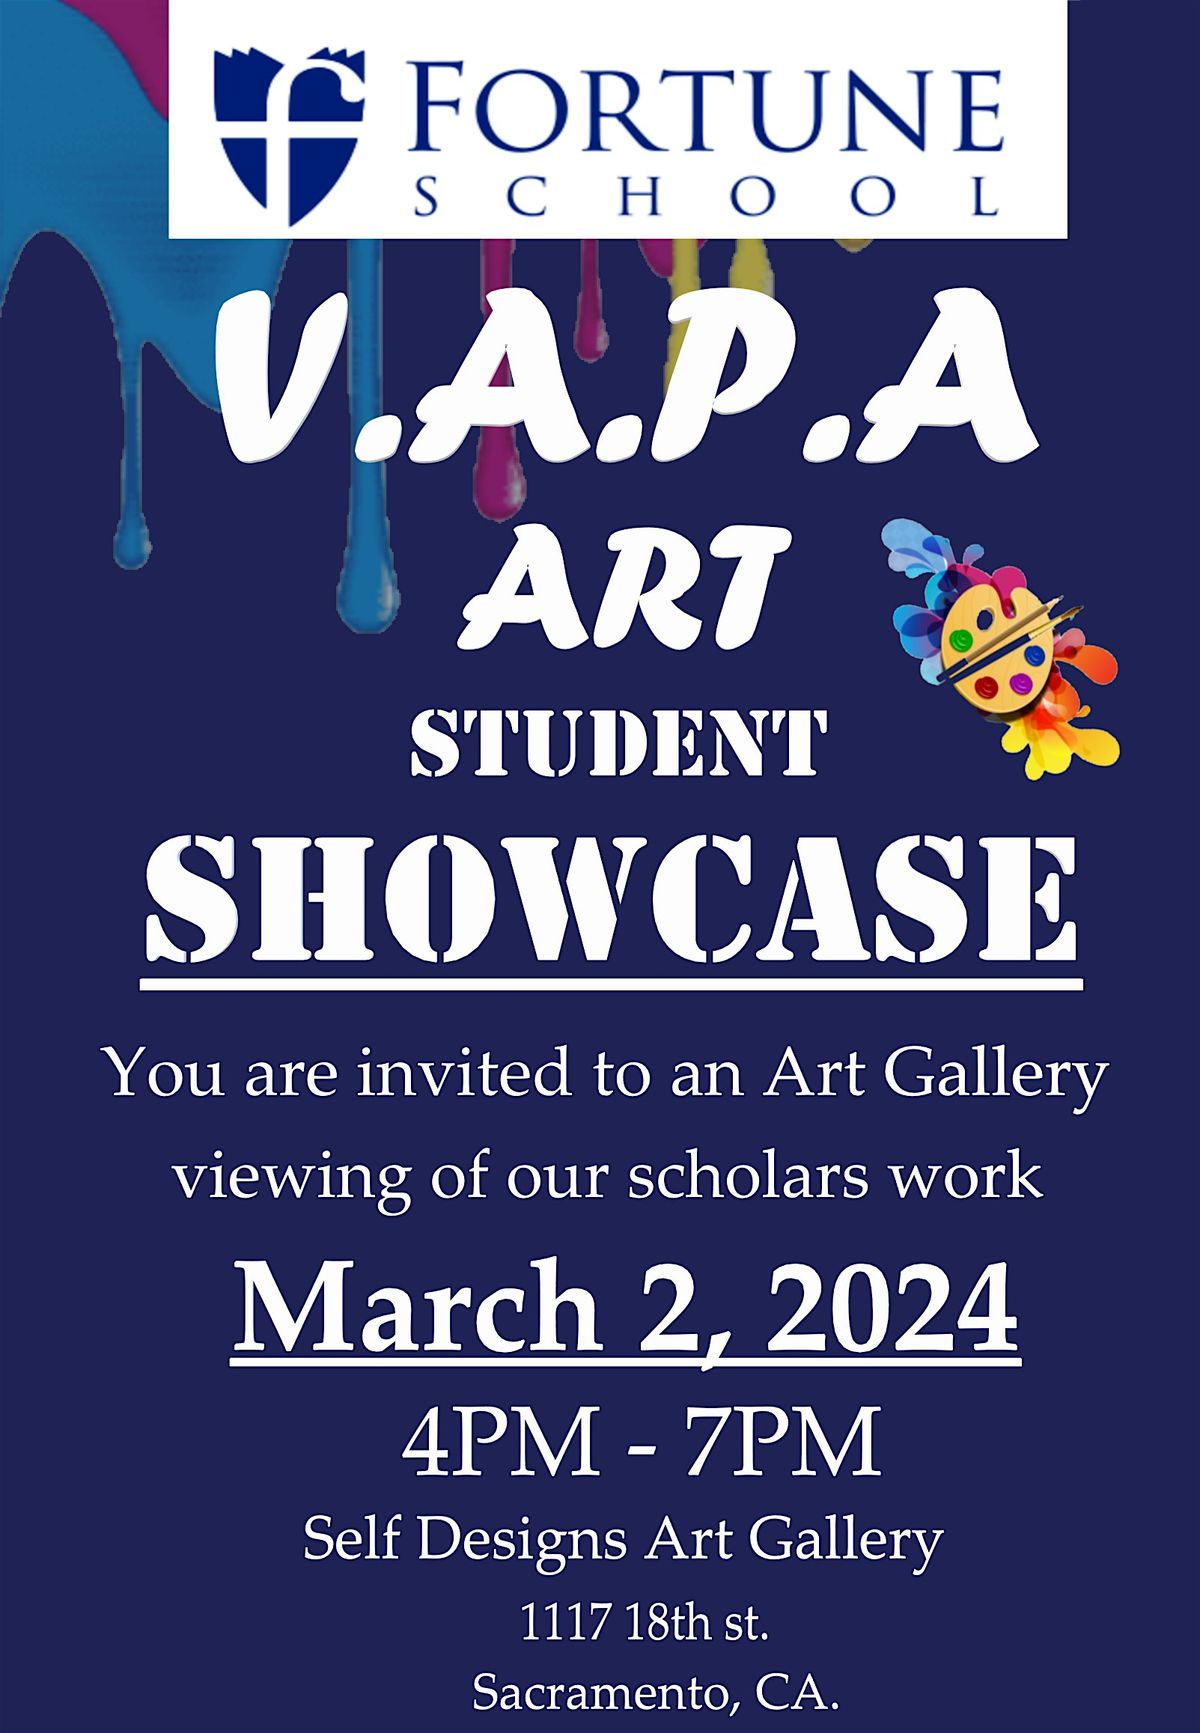 FORTUNE SCHOOL V.A.P.A. STUDENT ART SHOW\/ART IN THE DARK GLOWING GALLERY..